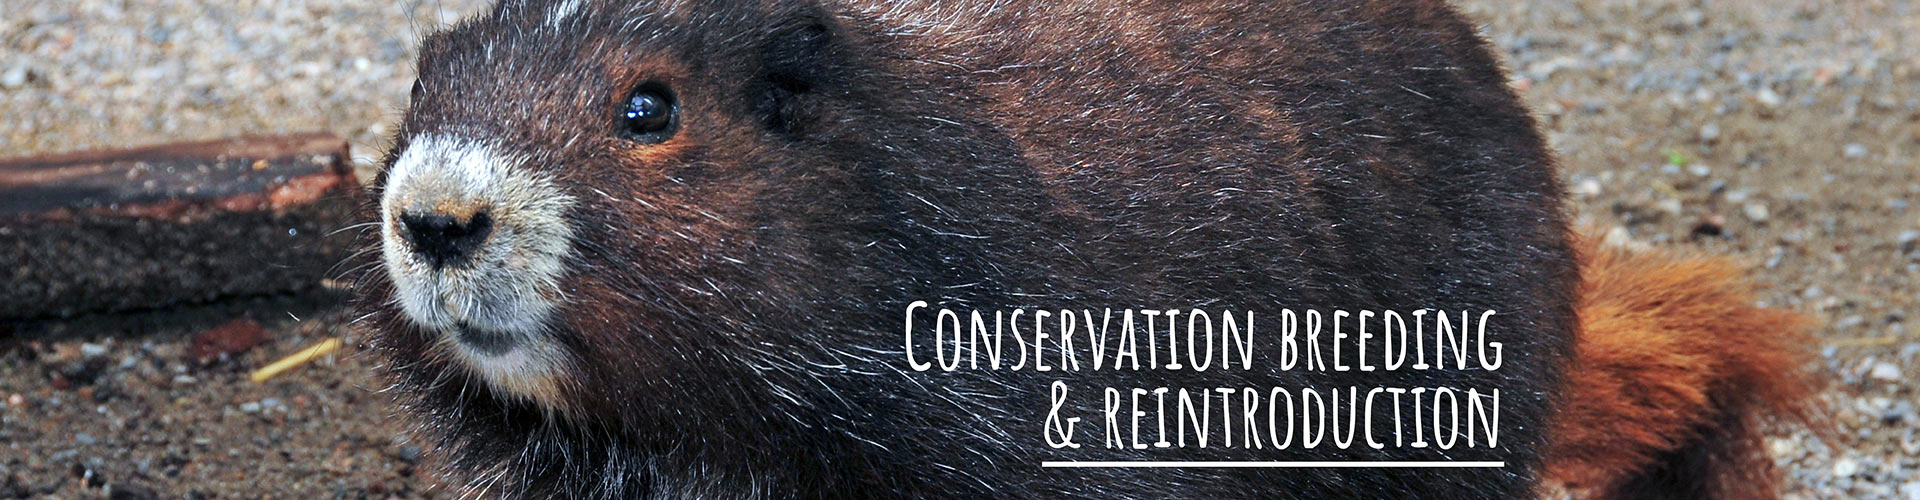 Conservation Breeding and Reintroduction - TSR